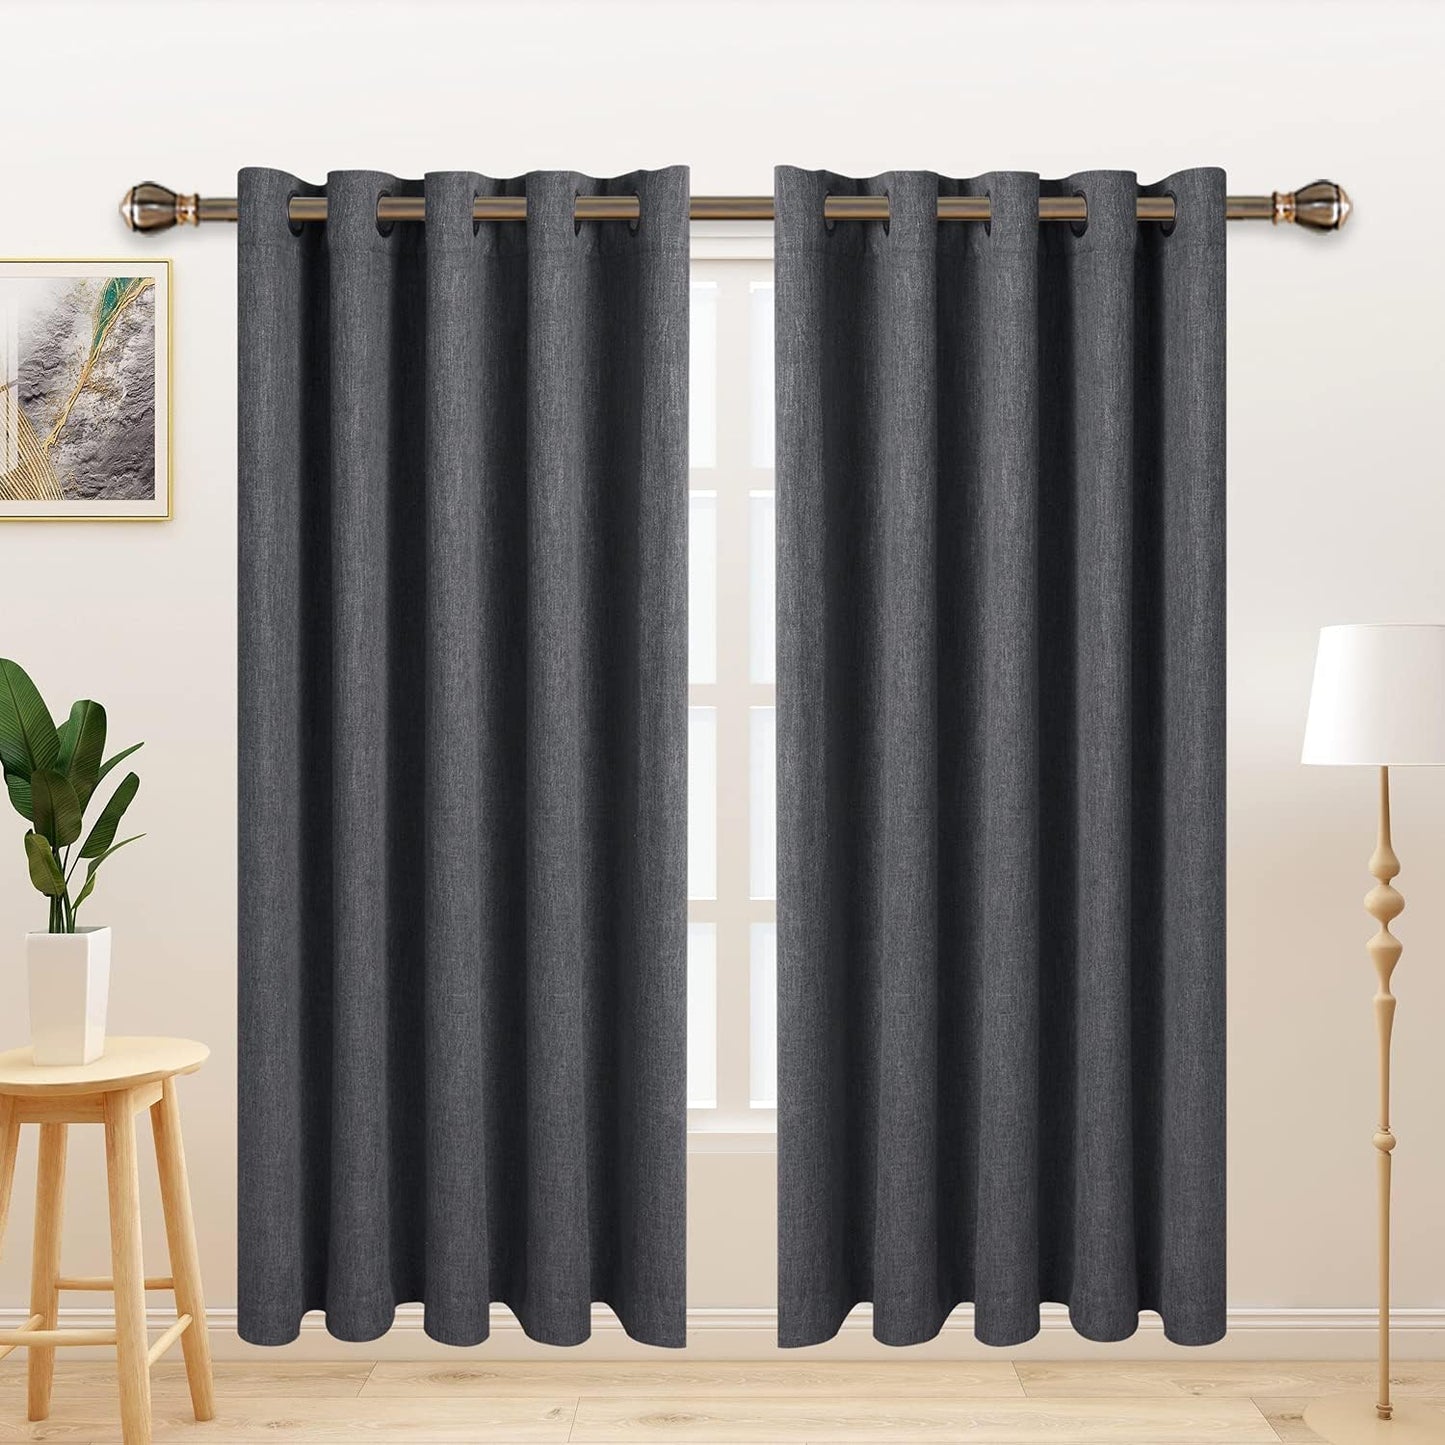 LORDTEX Linen Look Textured Blackout Curtains with Thermal Insulated Liner - Heavy Thick Grommet Window Drapes for Bedroom, 50 X 84 Inches, Ivory, Set of 2 Panels  LORDTEX Grey 70 X 84 Inches 